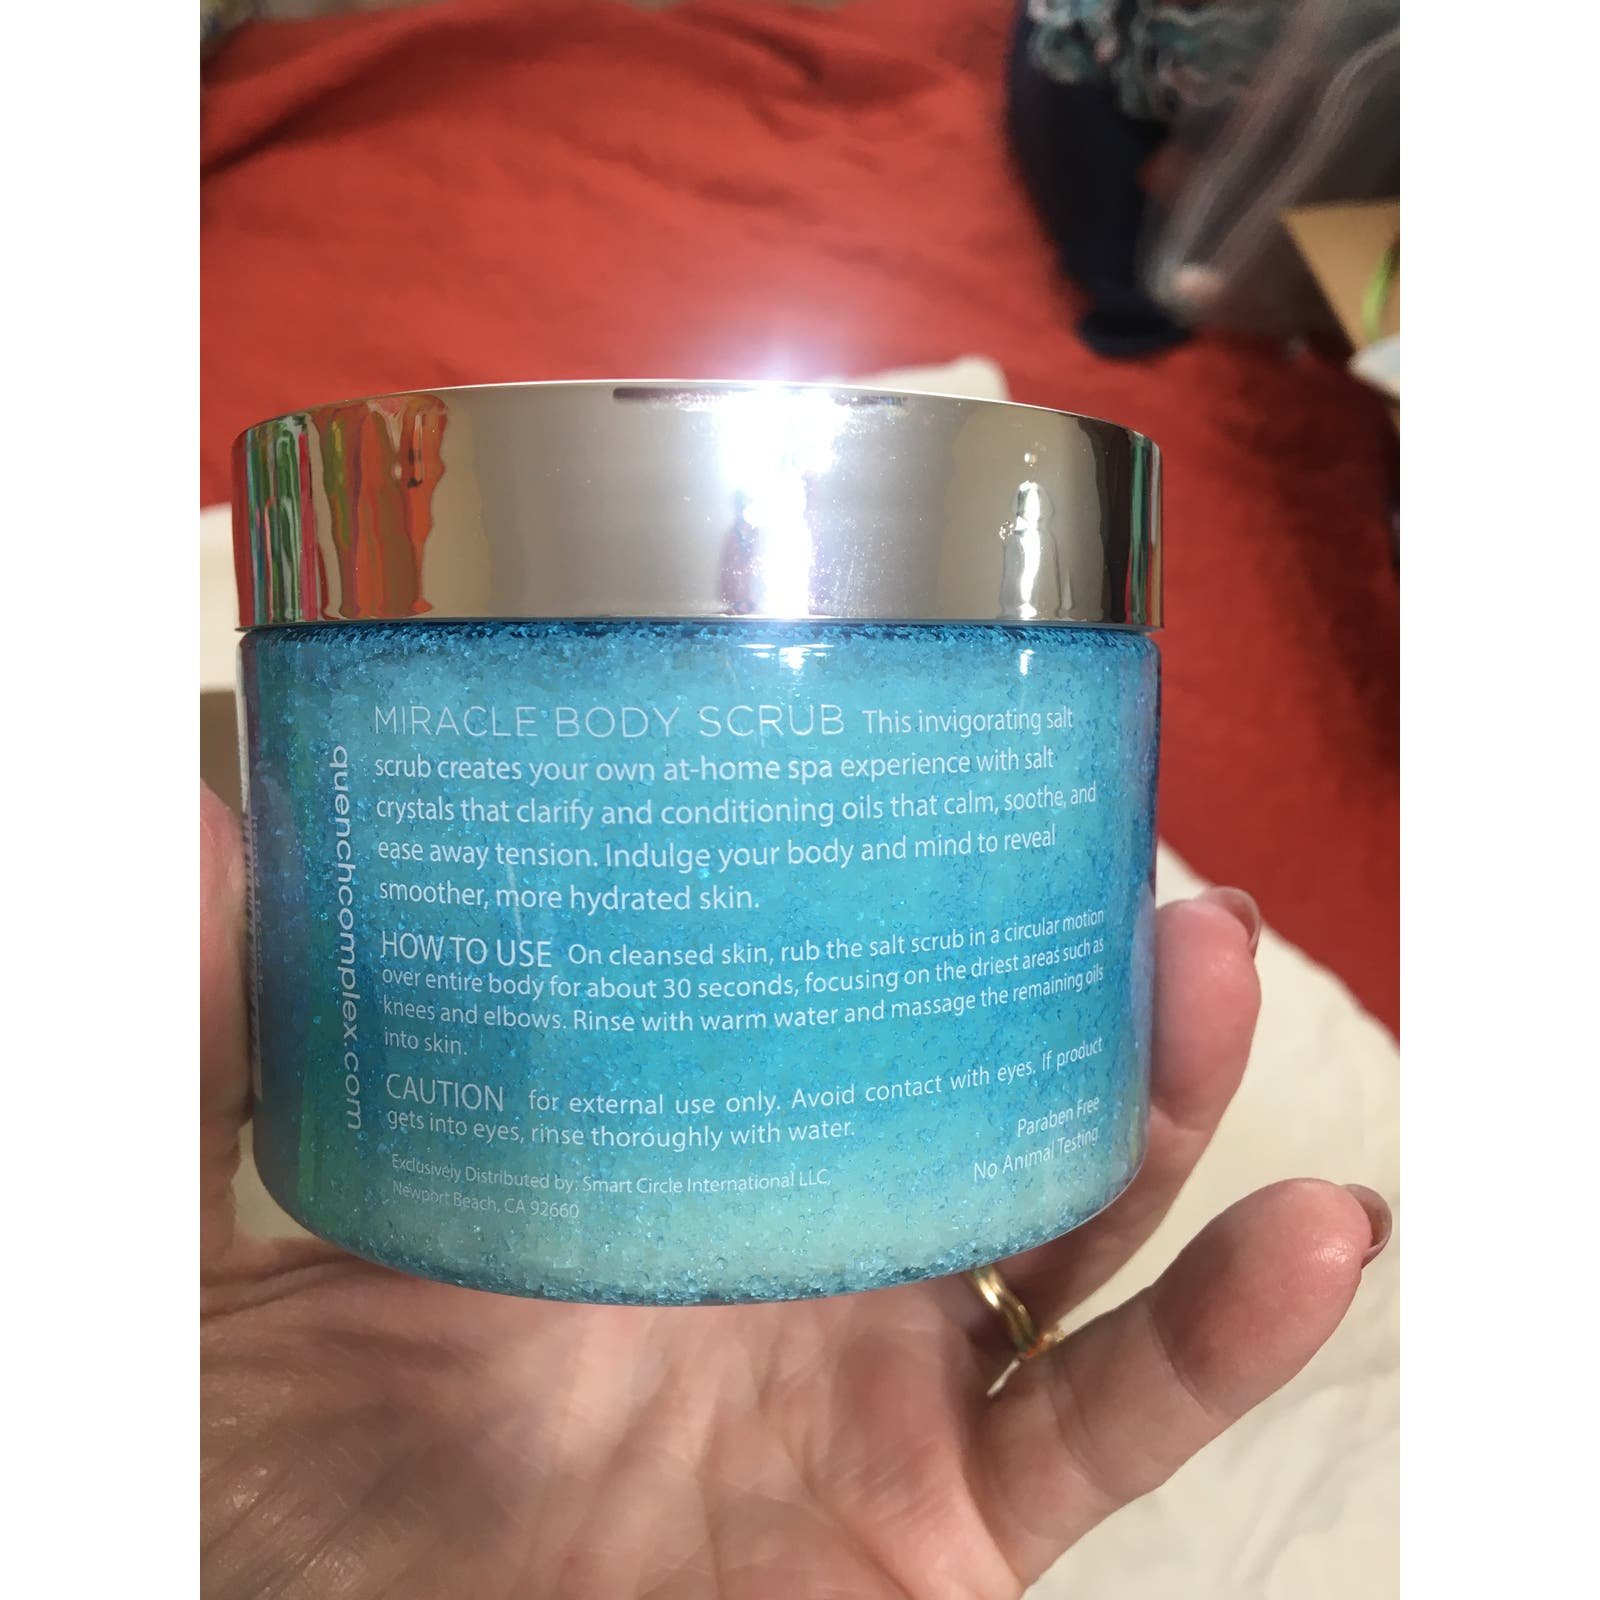 NWOT Never Opened, Quench Microwater Complex Miracle Body Scrub & Souffle´ AHvsb4DfS